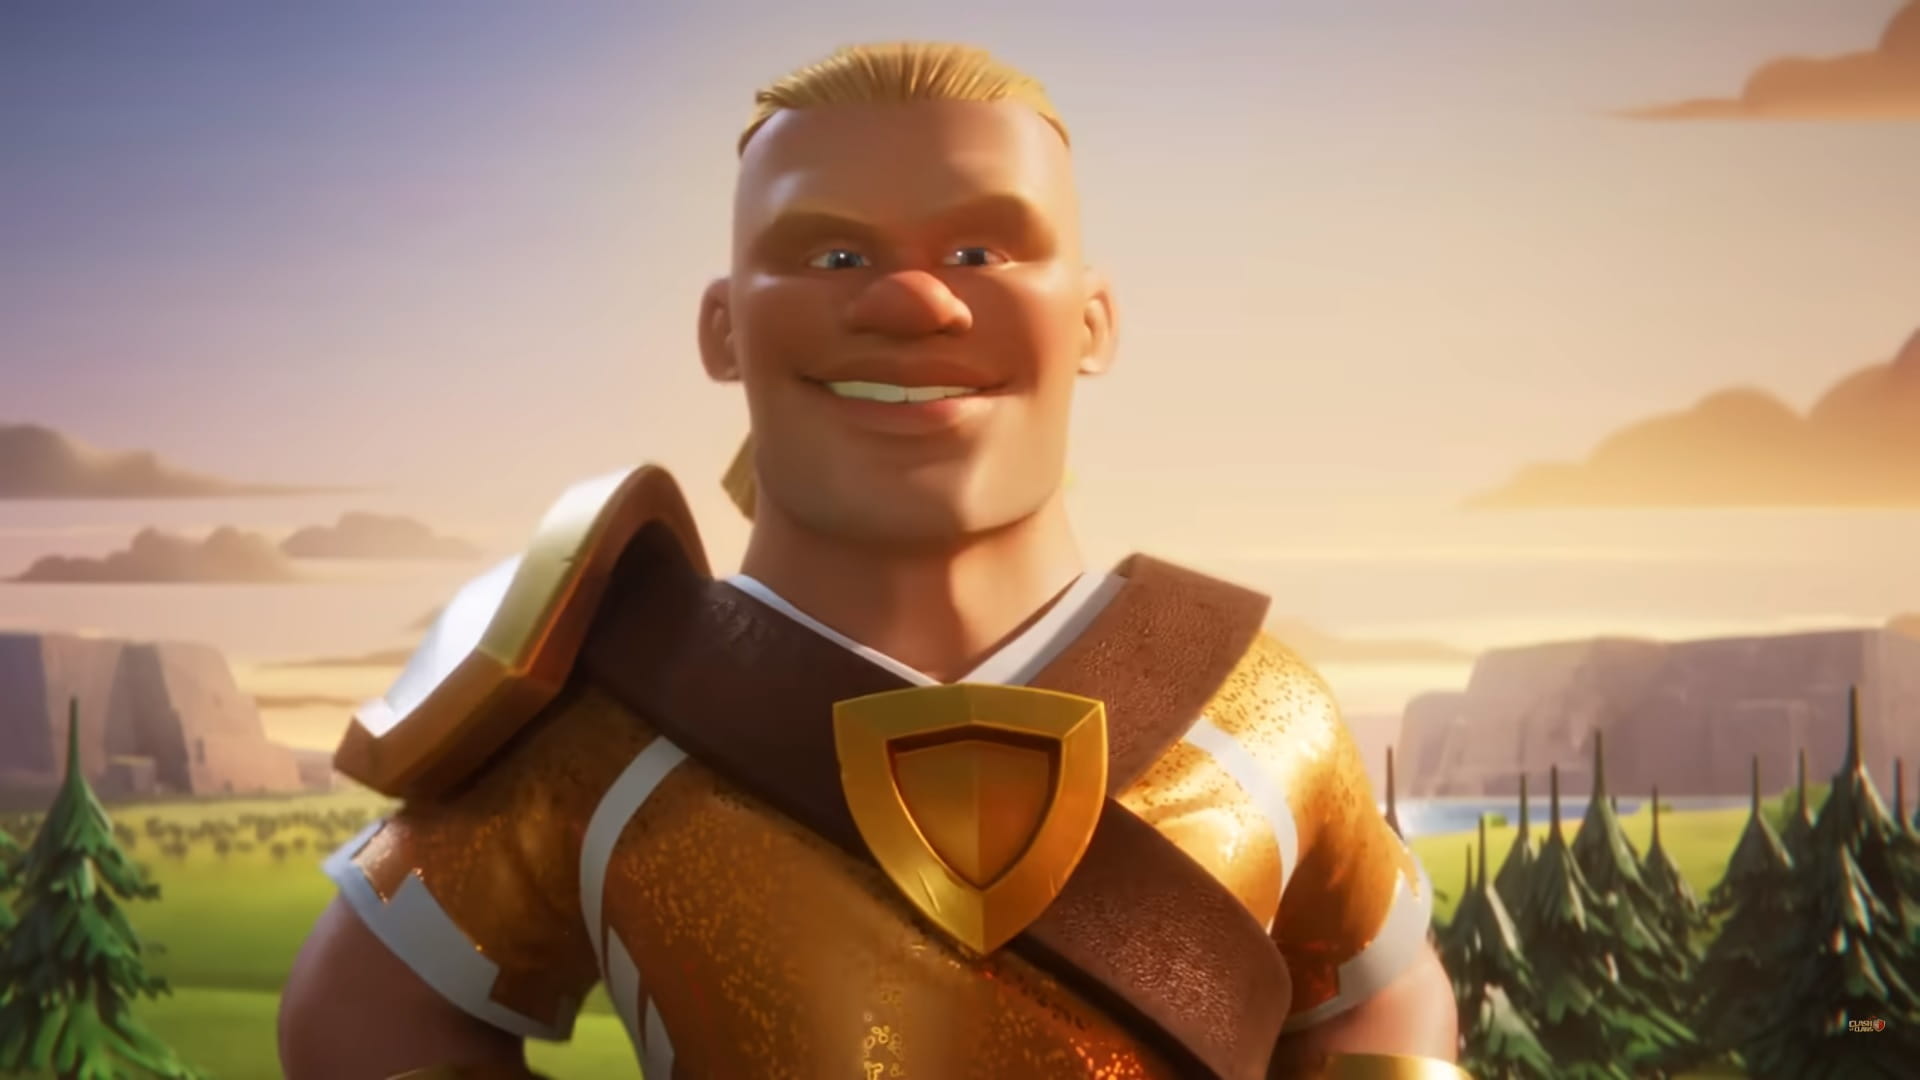 Haaland is Clash of Clans’ first real-world character, and he looks painfully accurate